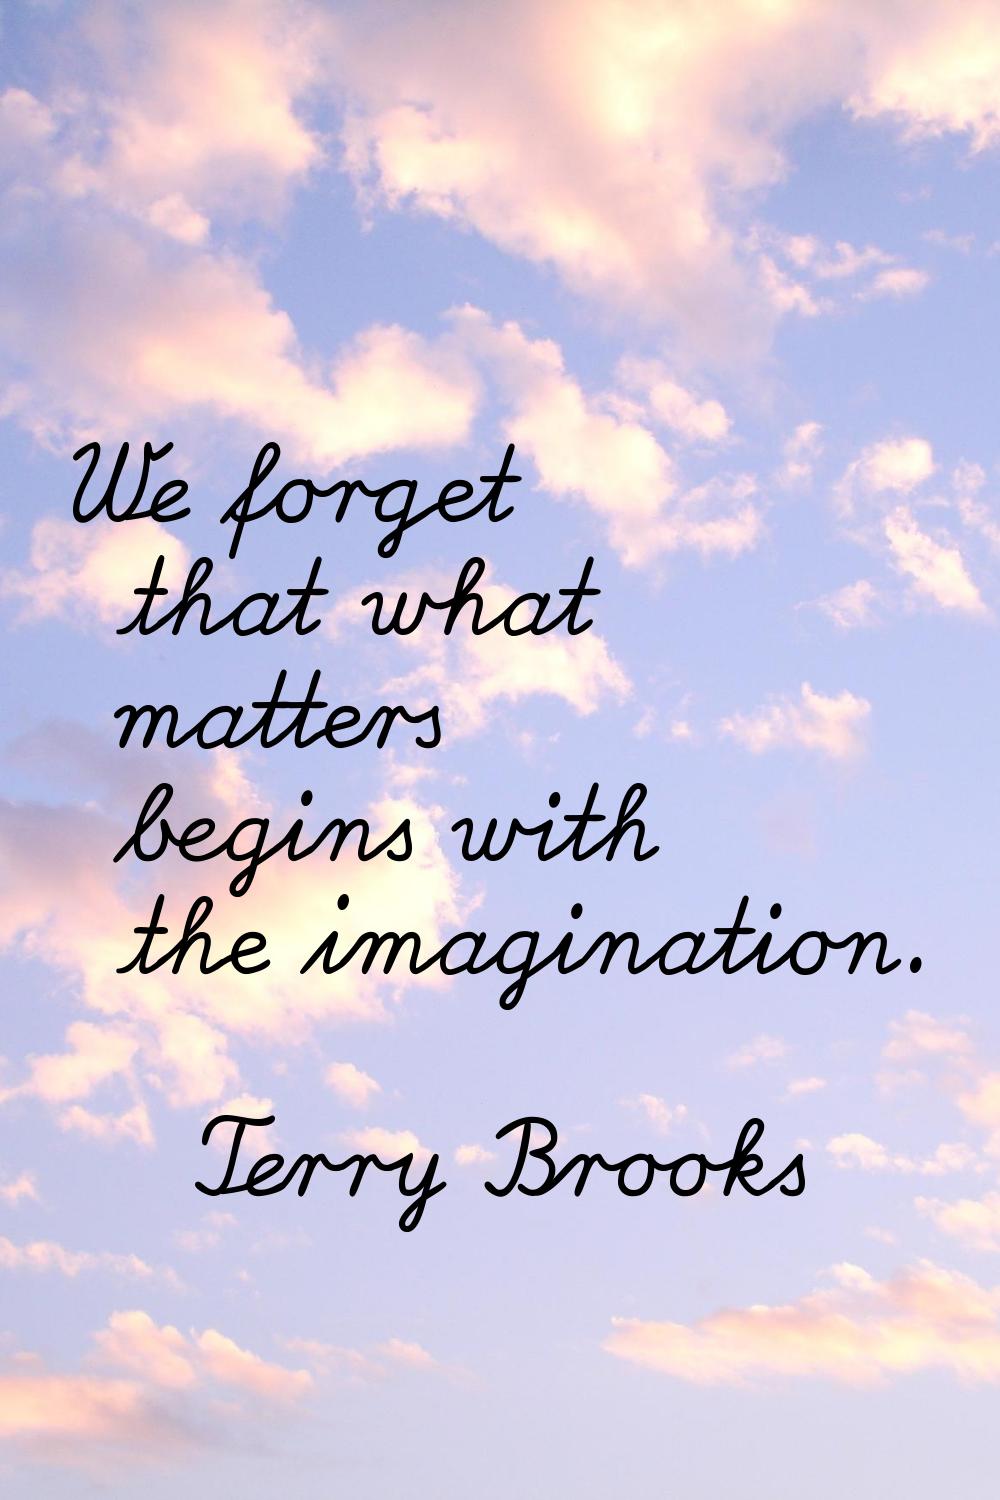 We forget that what matters begins with the imagination.